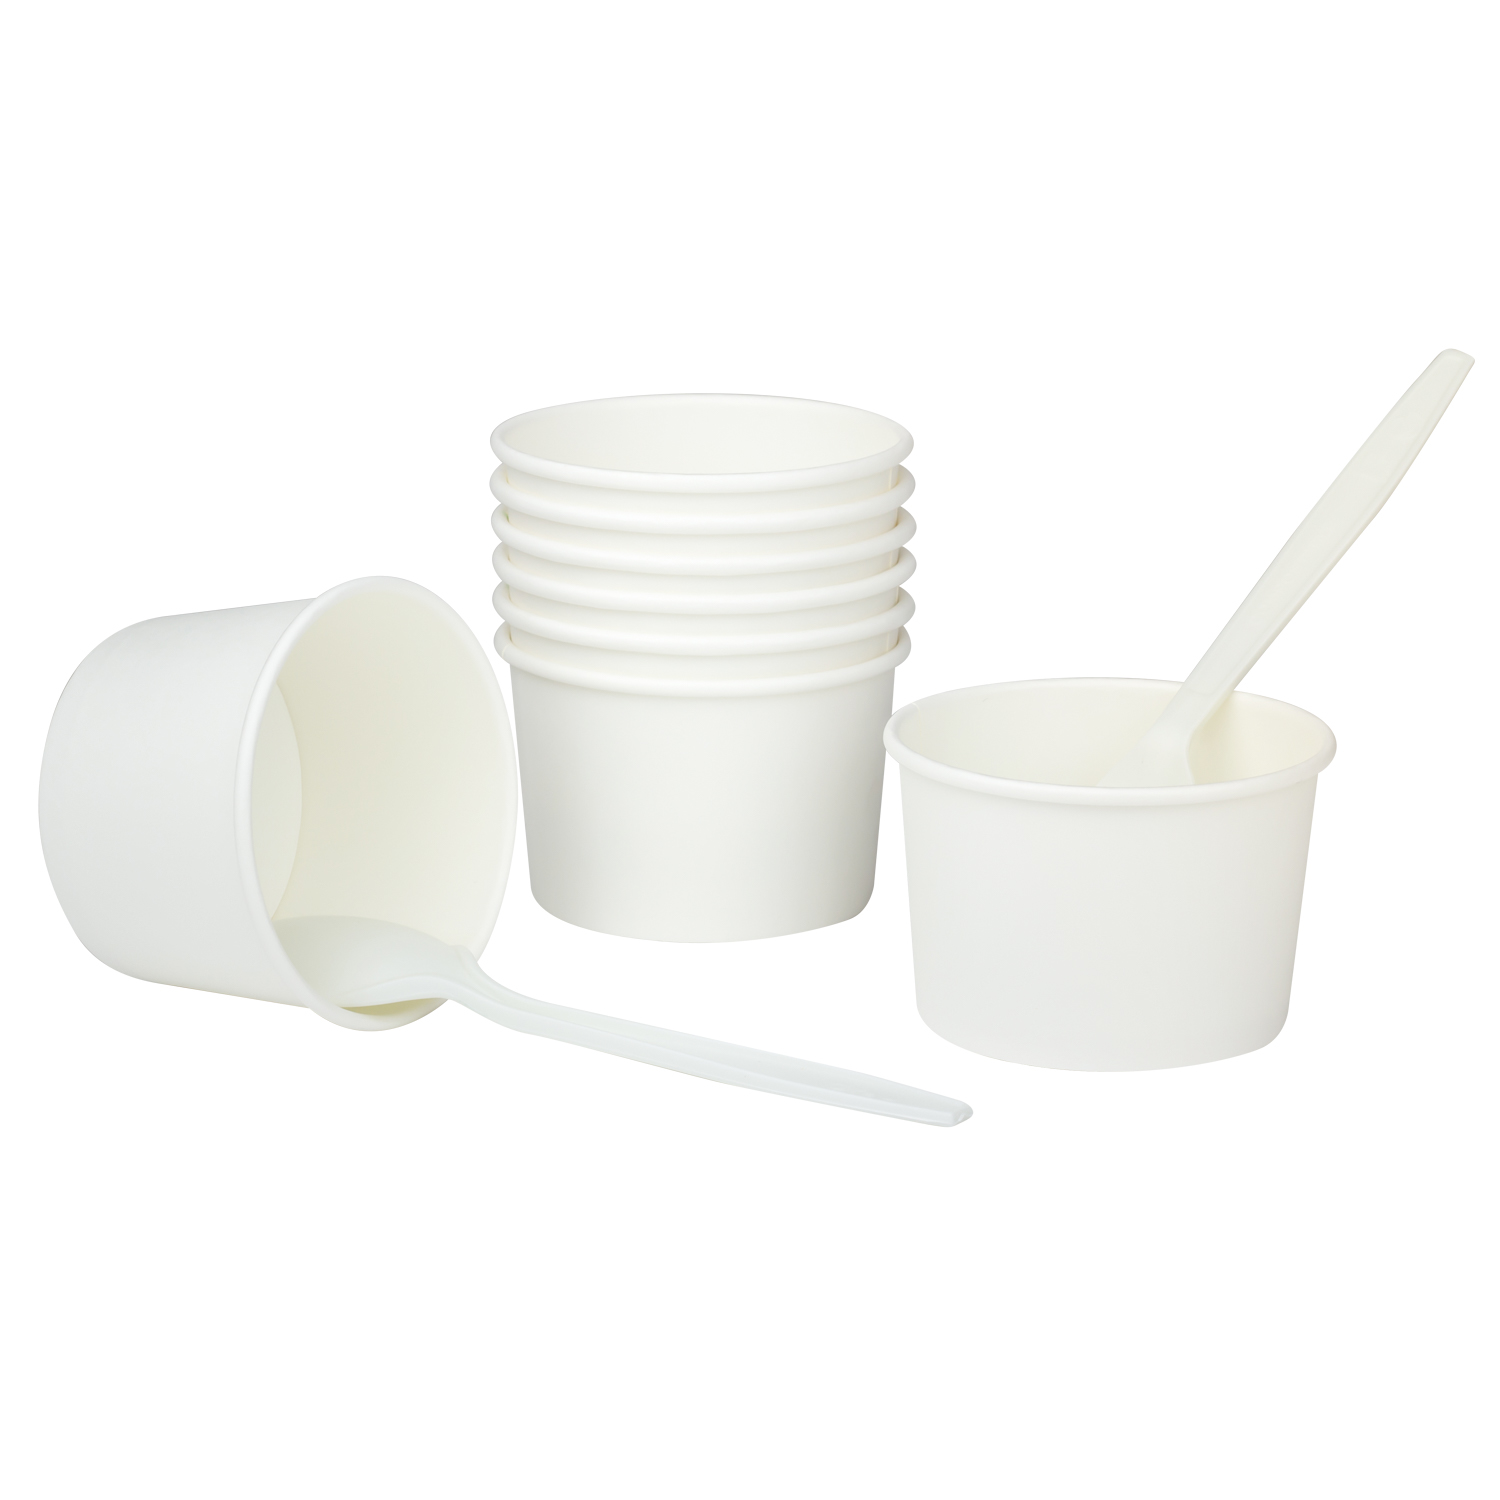 Karat Earth by Lollicup White Soup Containers